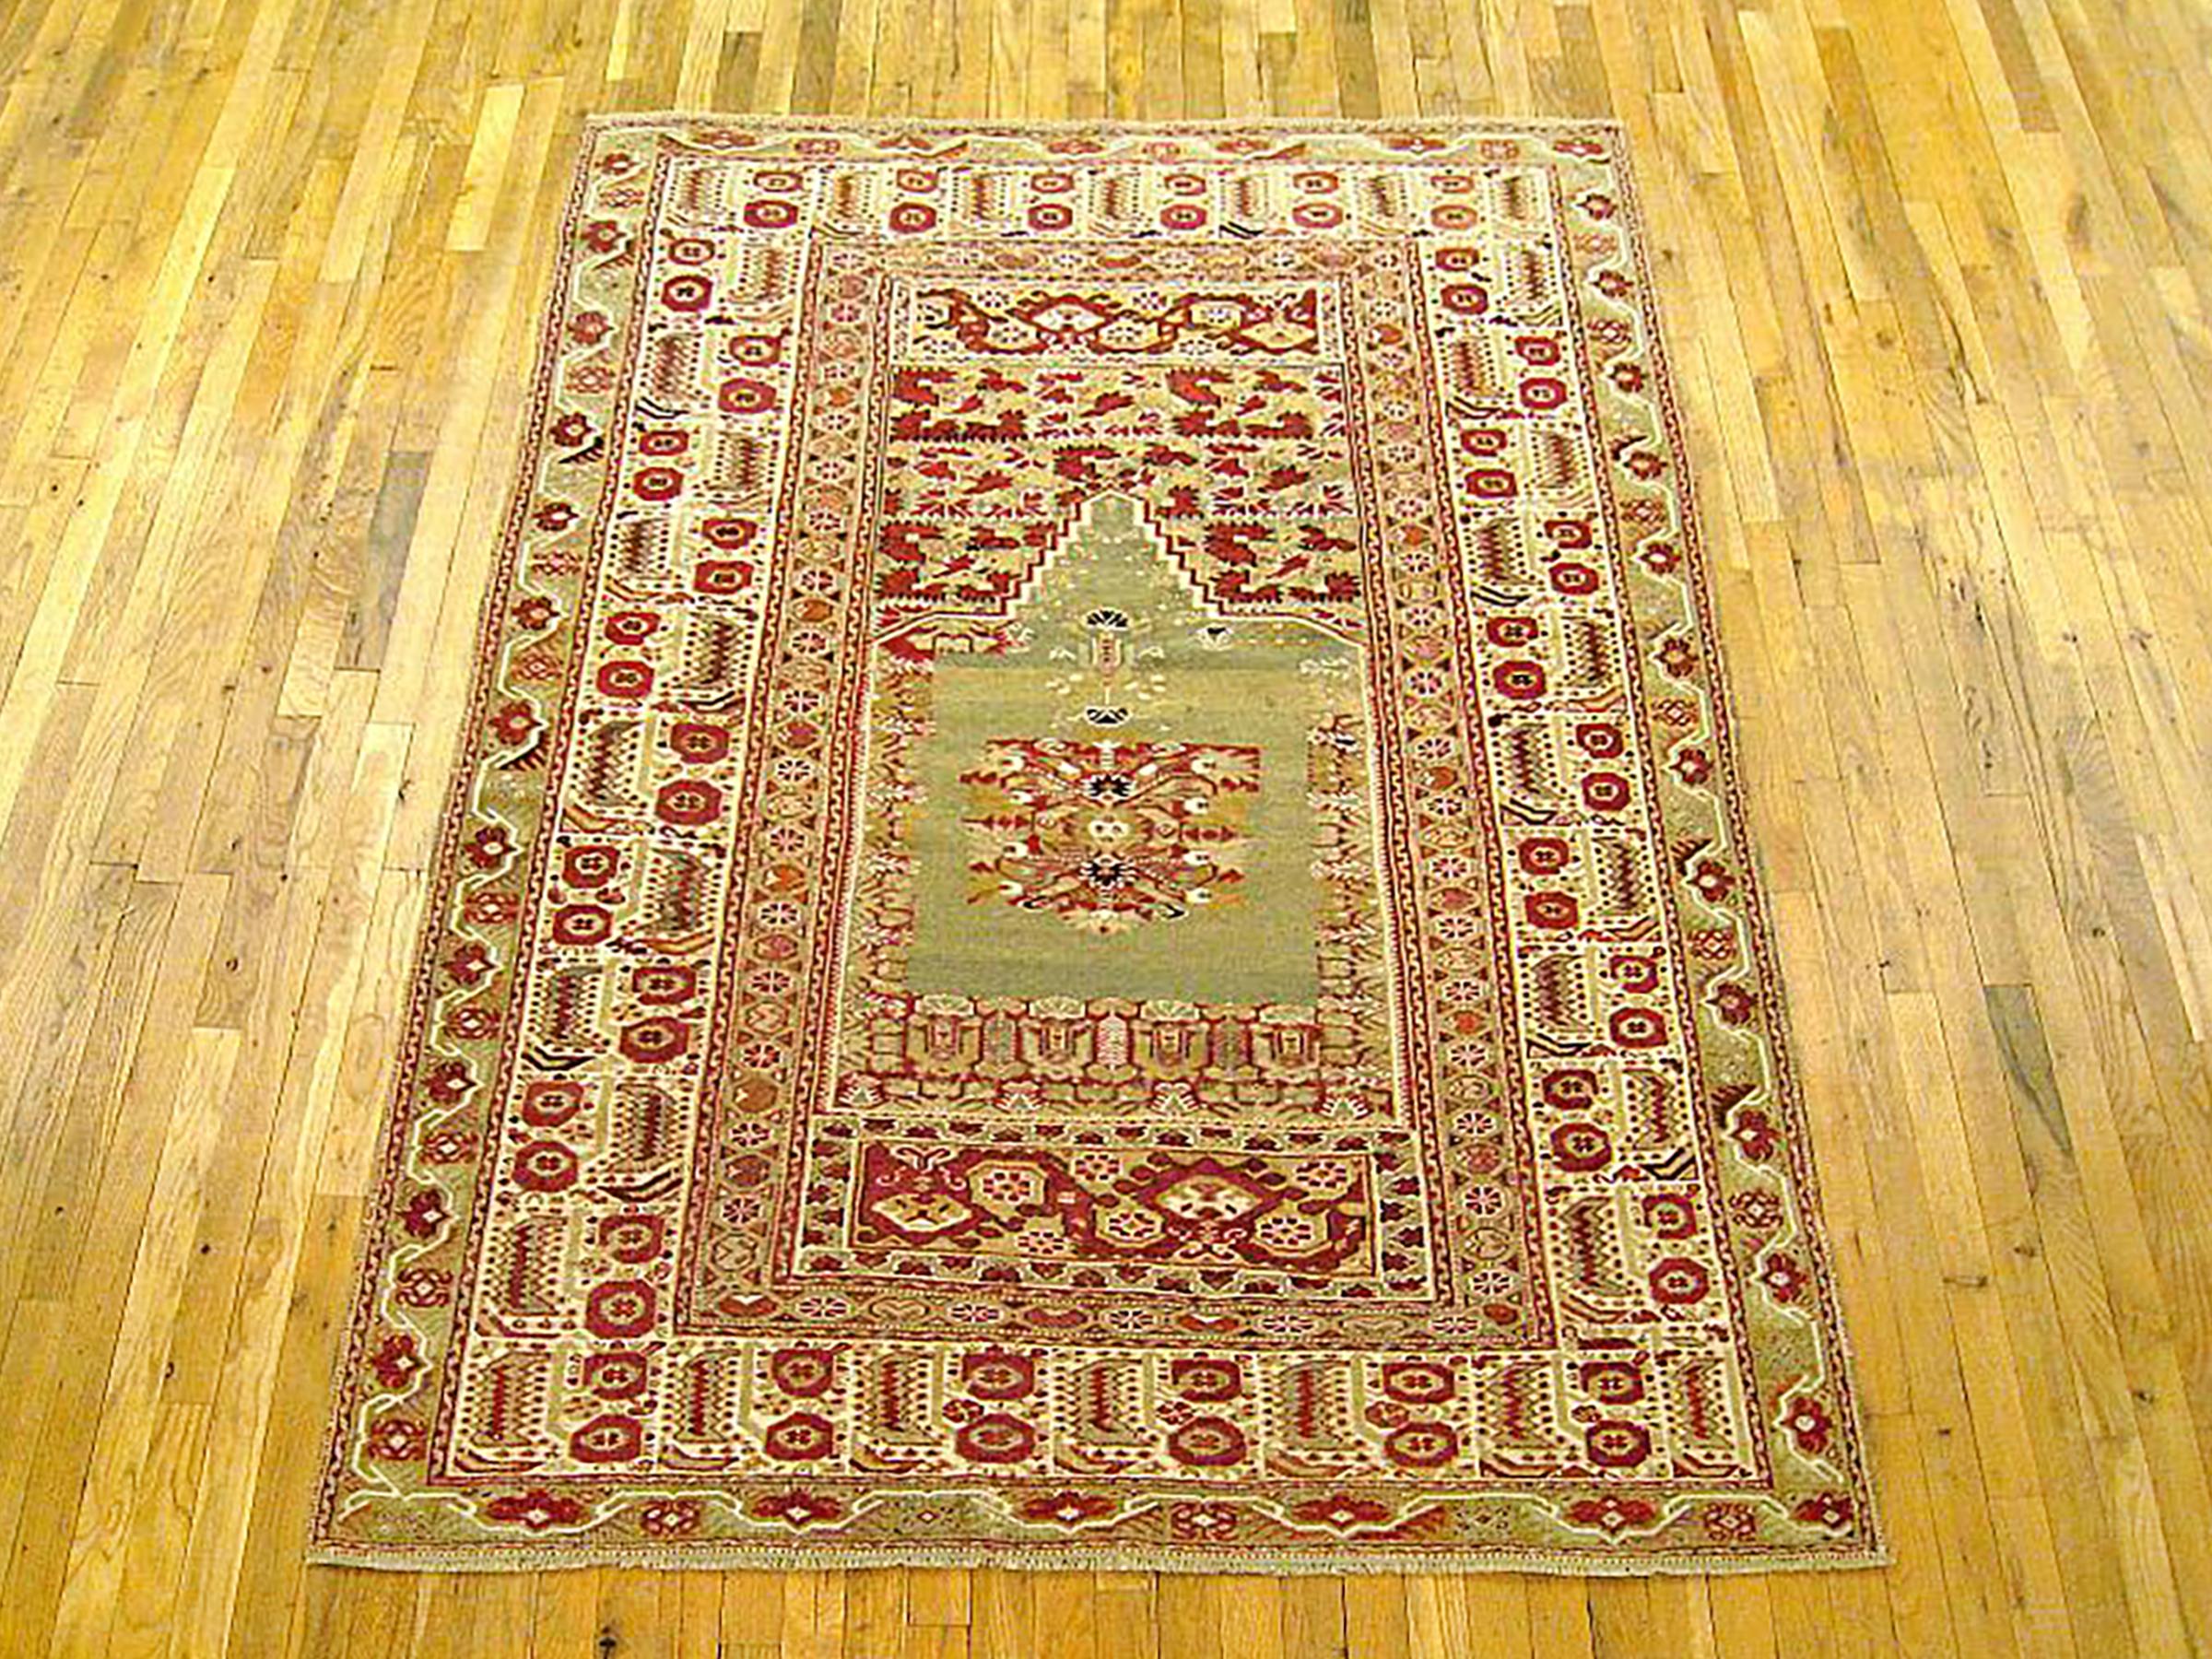 Vintage Turkish Ghiordes Decorative Rug, Small size, with Medium blue Field

A gorgeous vintage Turkish Ghiordes carpet, circa 1940, size 7'1” x 5'0”. This lovely carpet features  a central medallion in a directional design on the medium blue